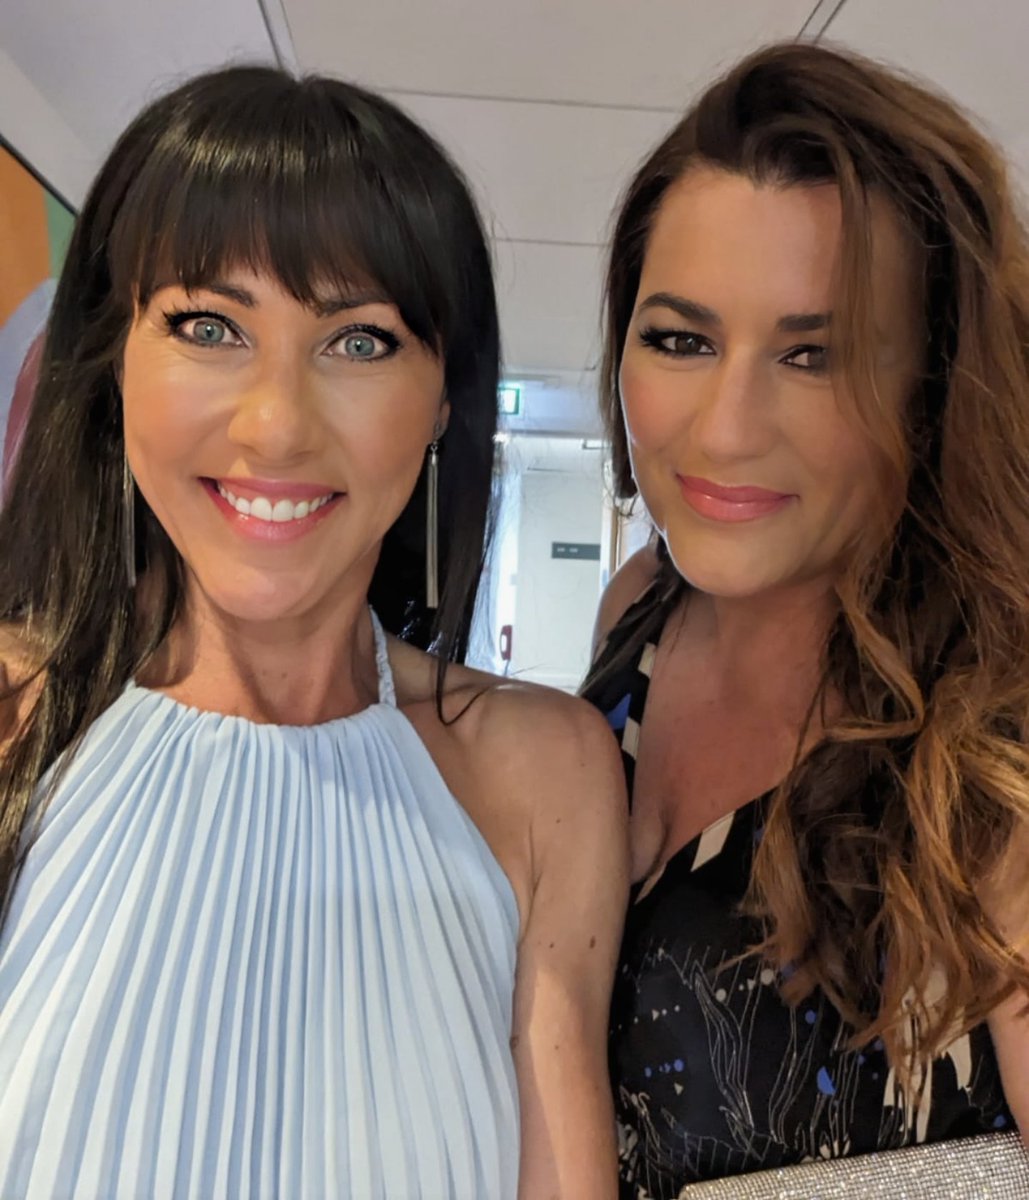 Off to the BAFTAS with my partner-in-crime Kate Magowan! 🌟 Casualty's shining bright tonight, fingers crossed for the win! Tune in for all the glitz, glam, and behind-the-scenes fun! #BAFTA #Casualty #RedCarpetReady #BAFTATVAwards